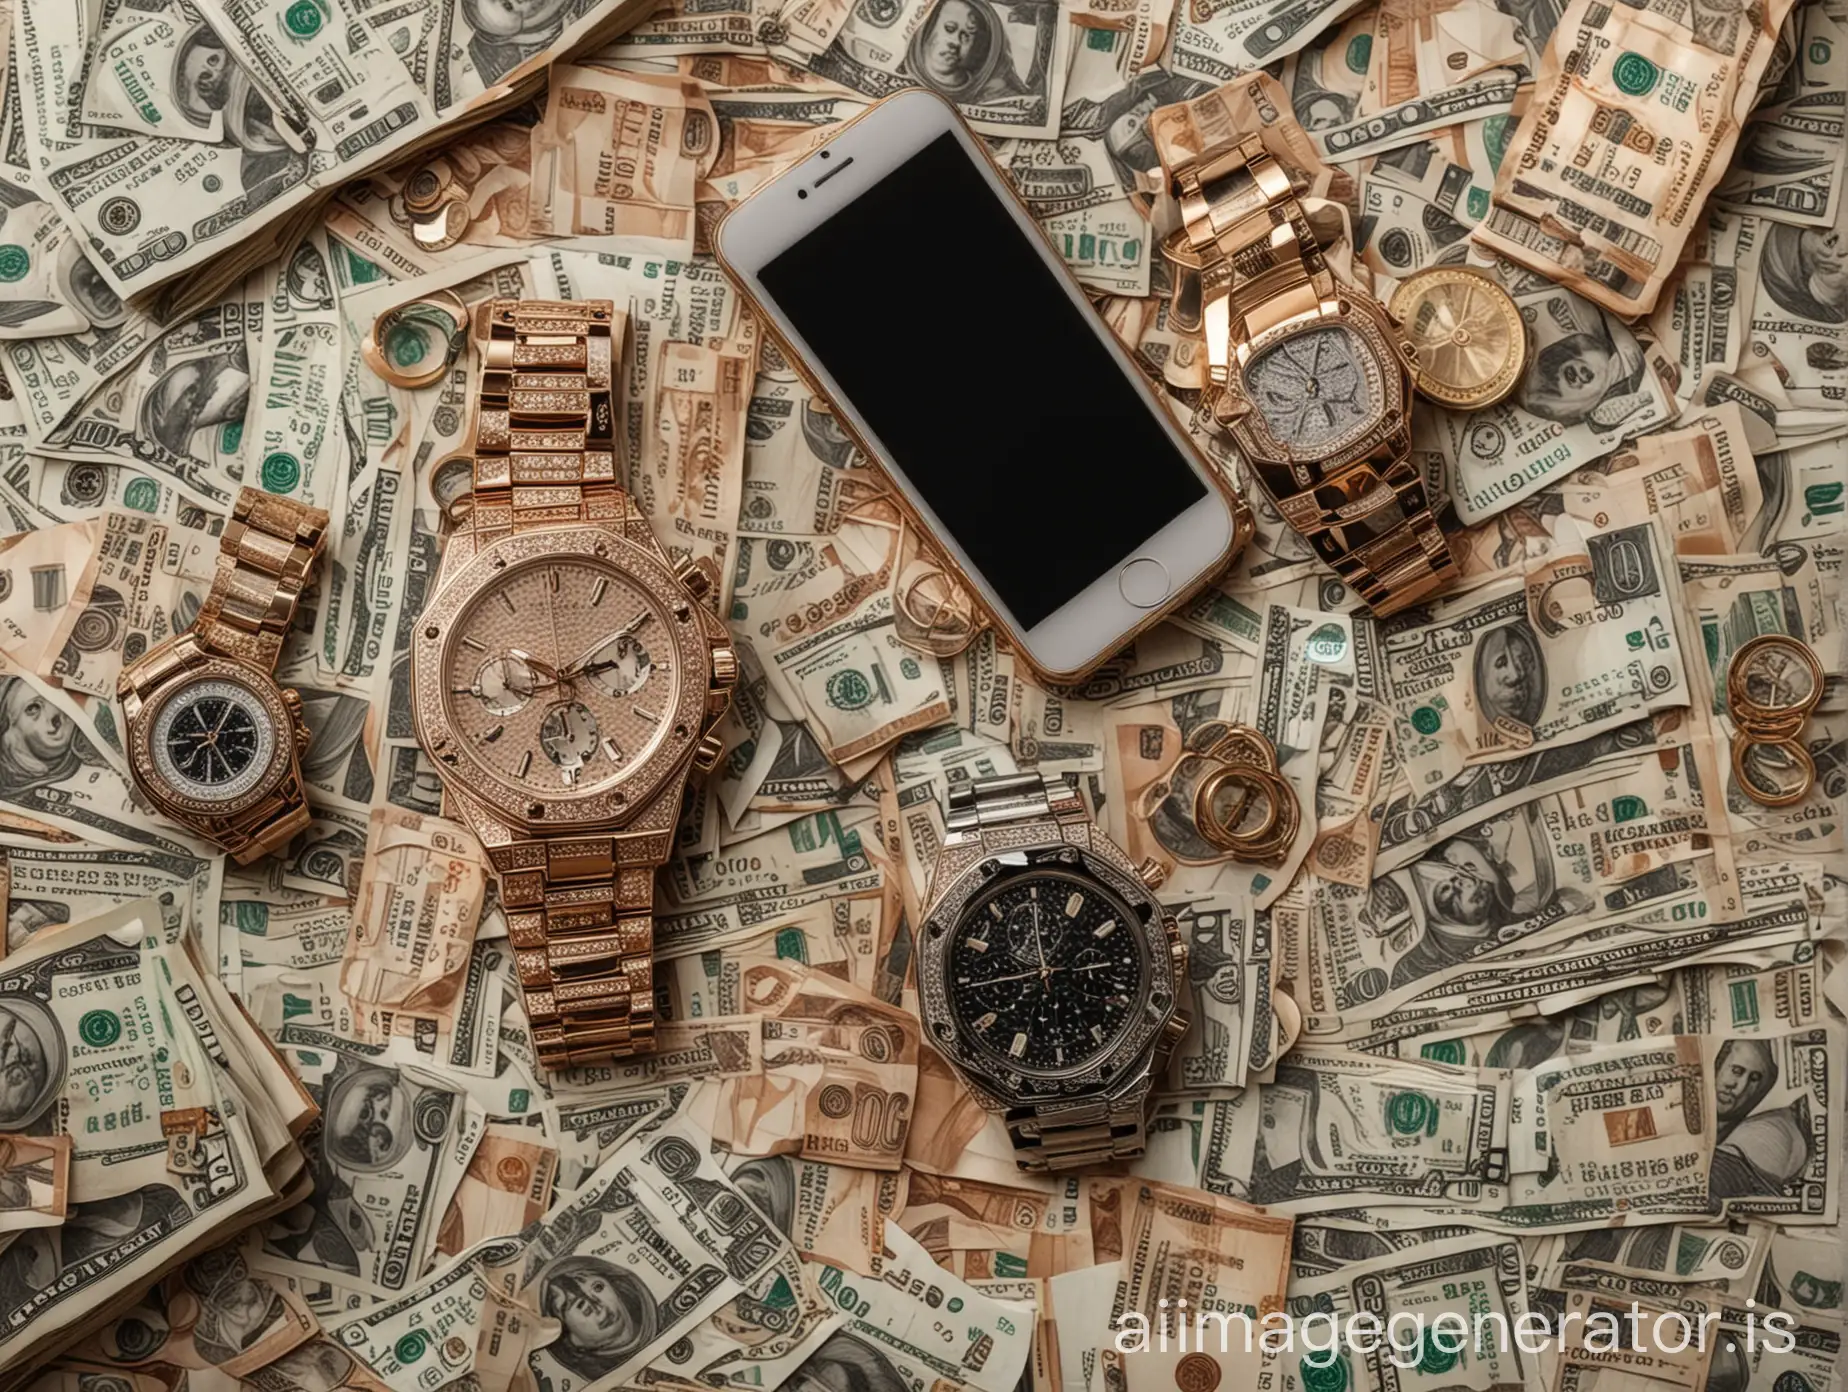 A lot of money and wealth, luxury watches and phones